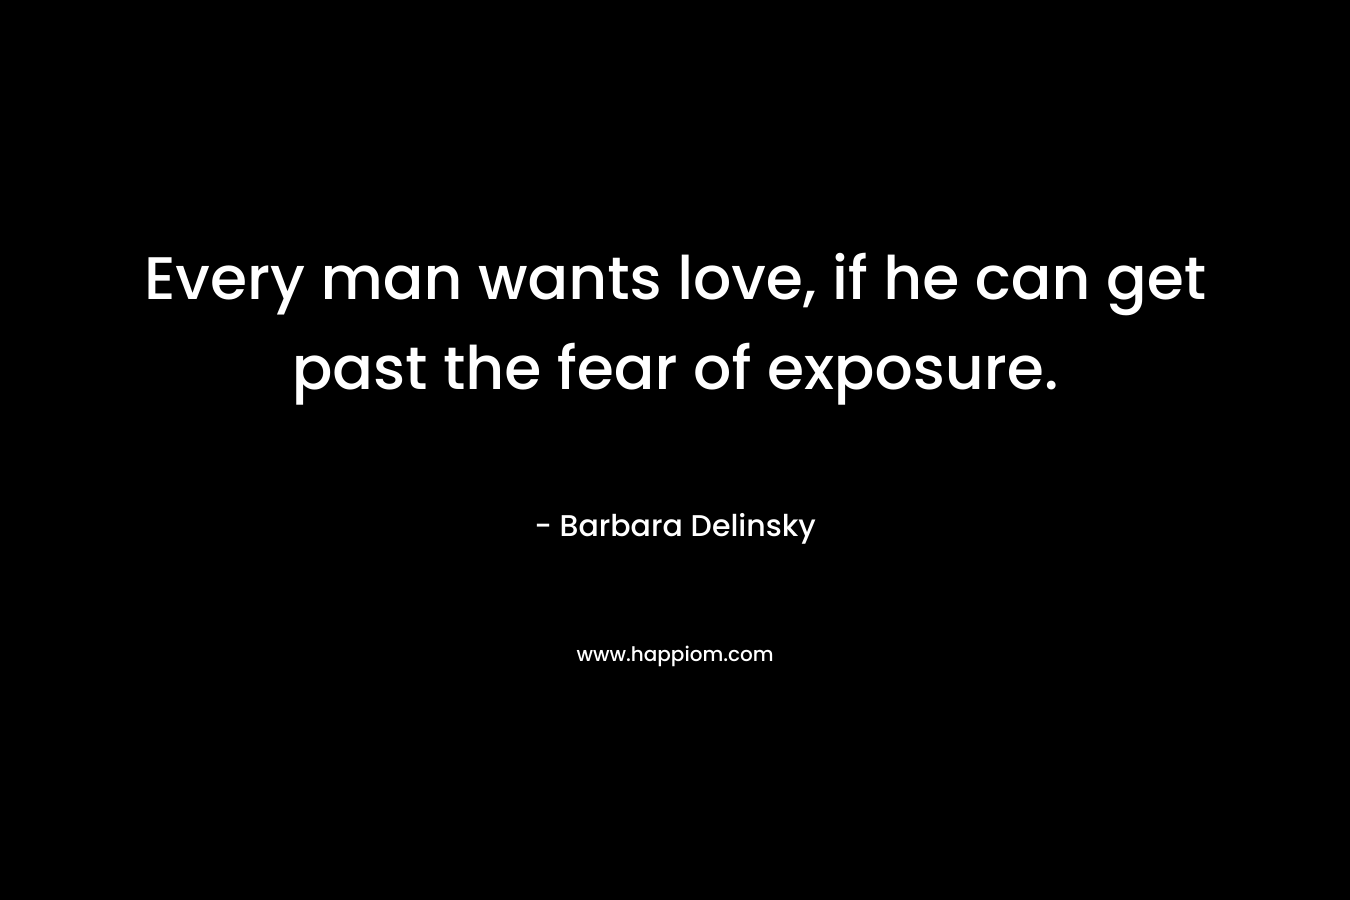 Every man wants love, if he can get past the fear of exposure. – Barbara Delinsky